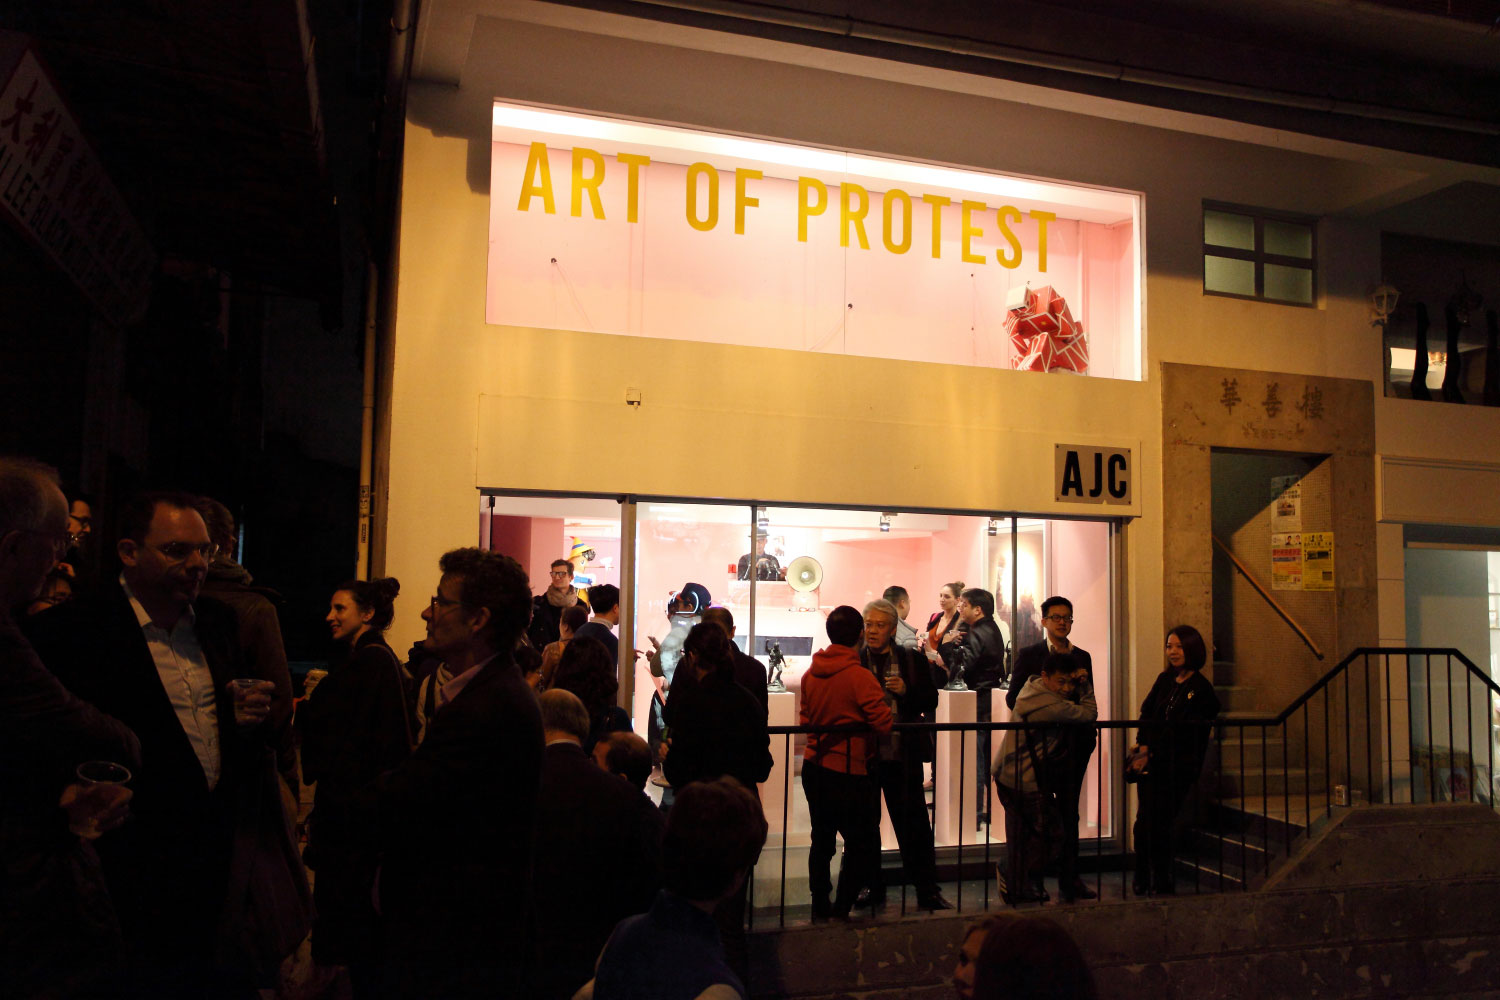 art-of-protest-resisting-against-absurity-by-kacey-wong-12.jpg